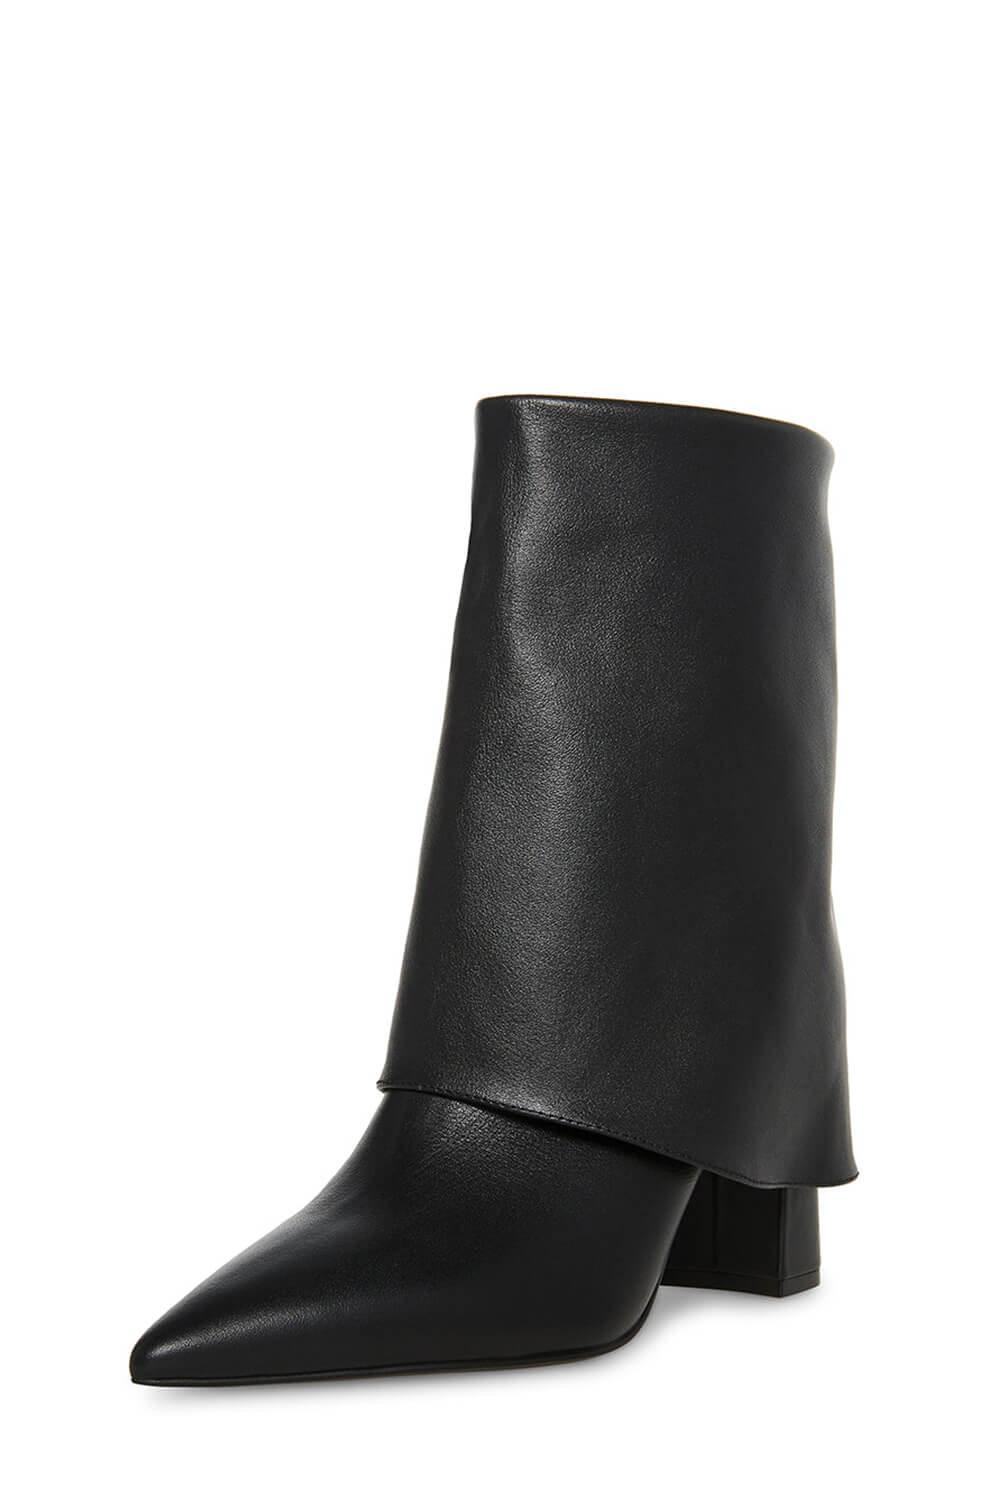 Faux Leather Point Toe Block Heel Fold Over Ankle Boots - Black